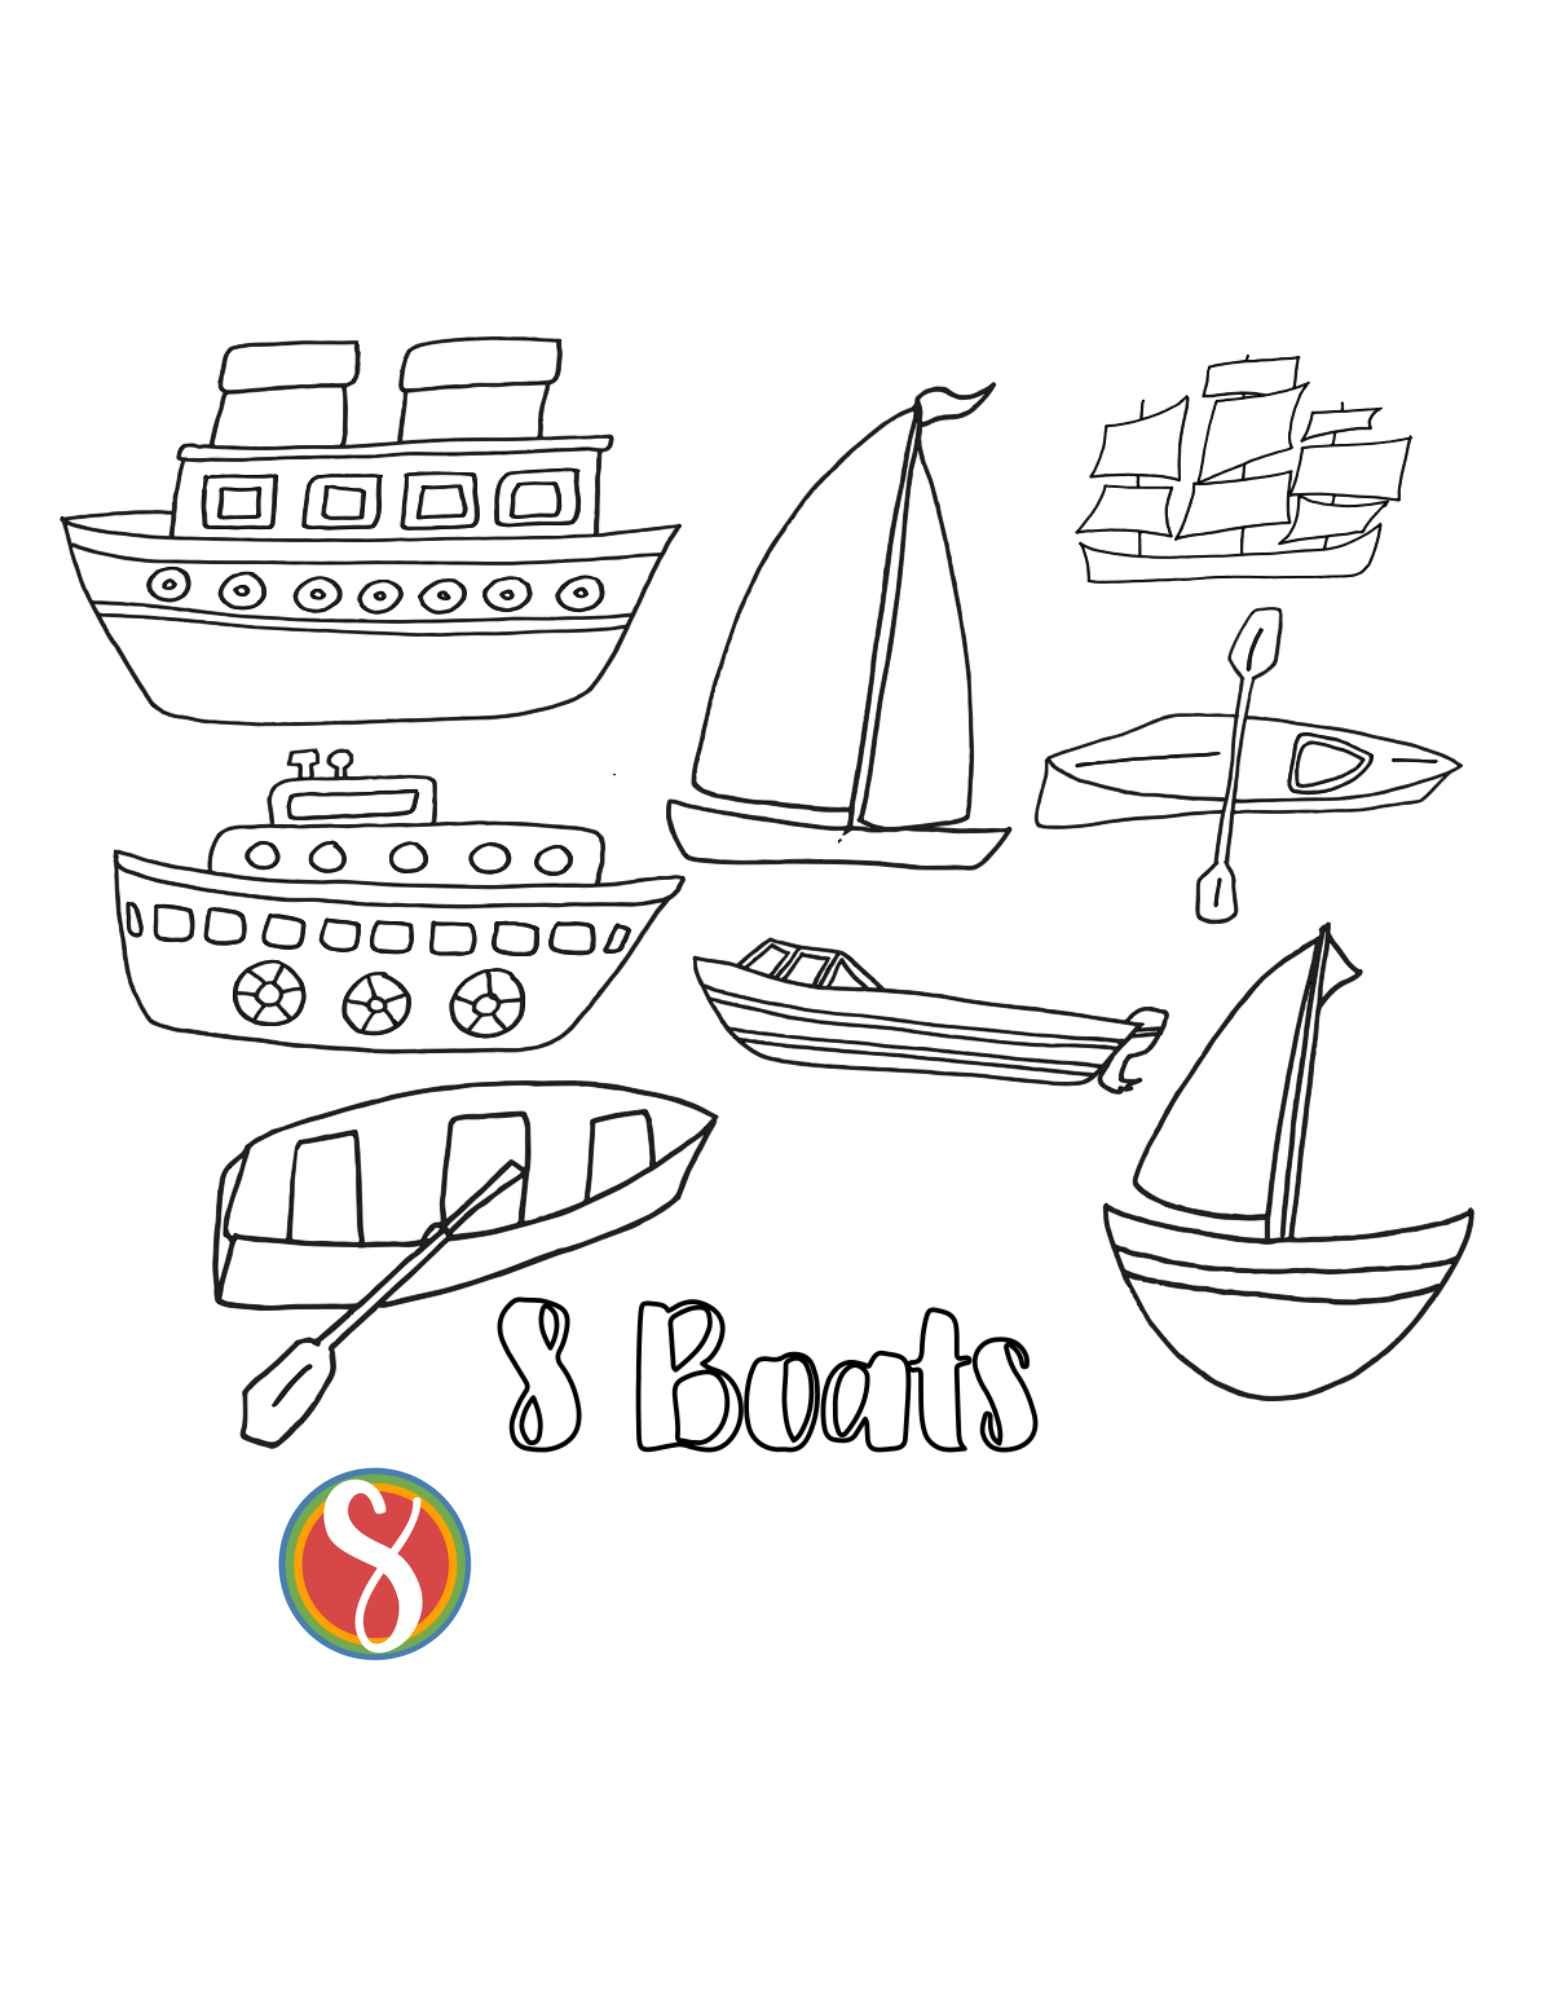 8 different boats drawn on this boat coloring page, text reads "8 boats"